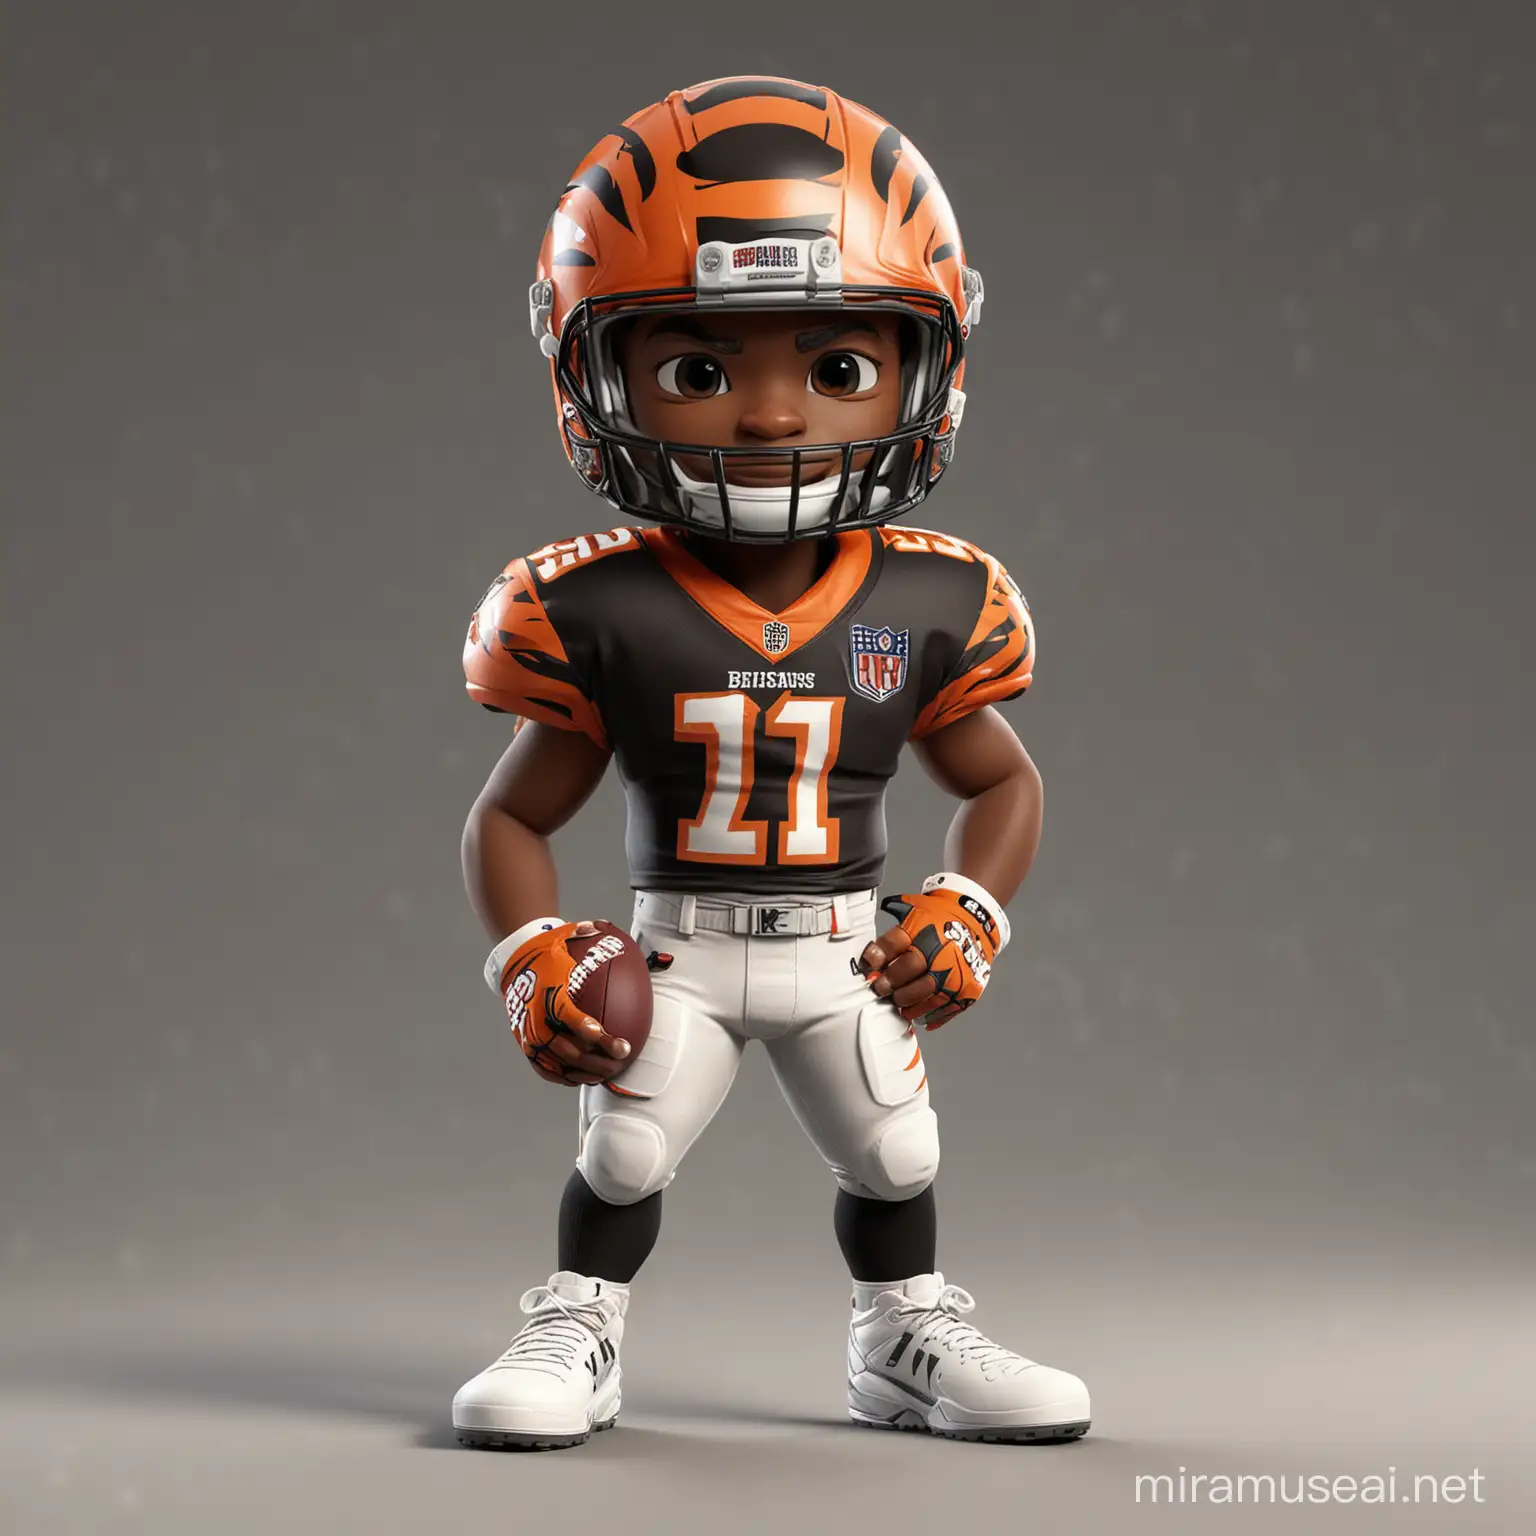 a cute 3d rendered nfl player looks like ja'marr chase, wearing american football helmet and cinnicati bengals kit, standing pose, cartoon style